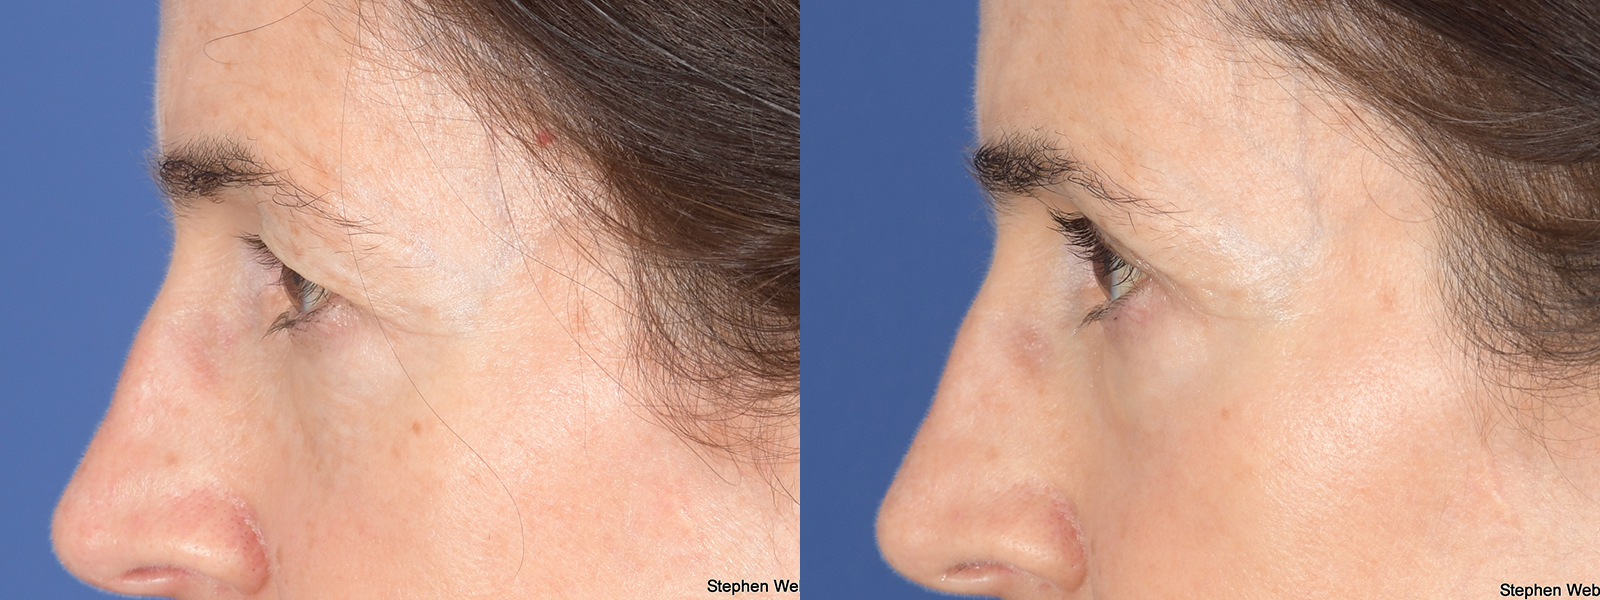 Blepharoplasty Before and After | Weber Facial Plastic Surgery